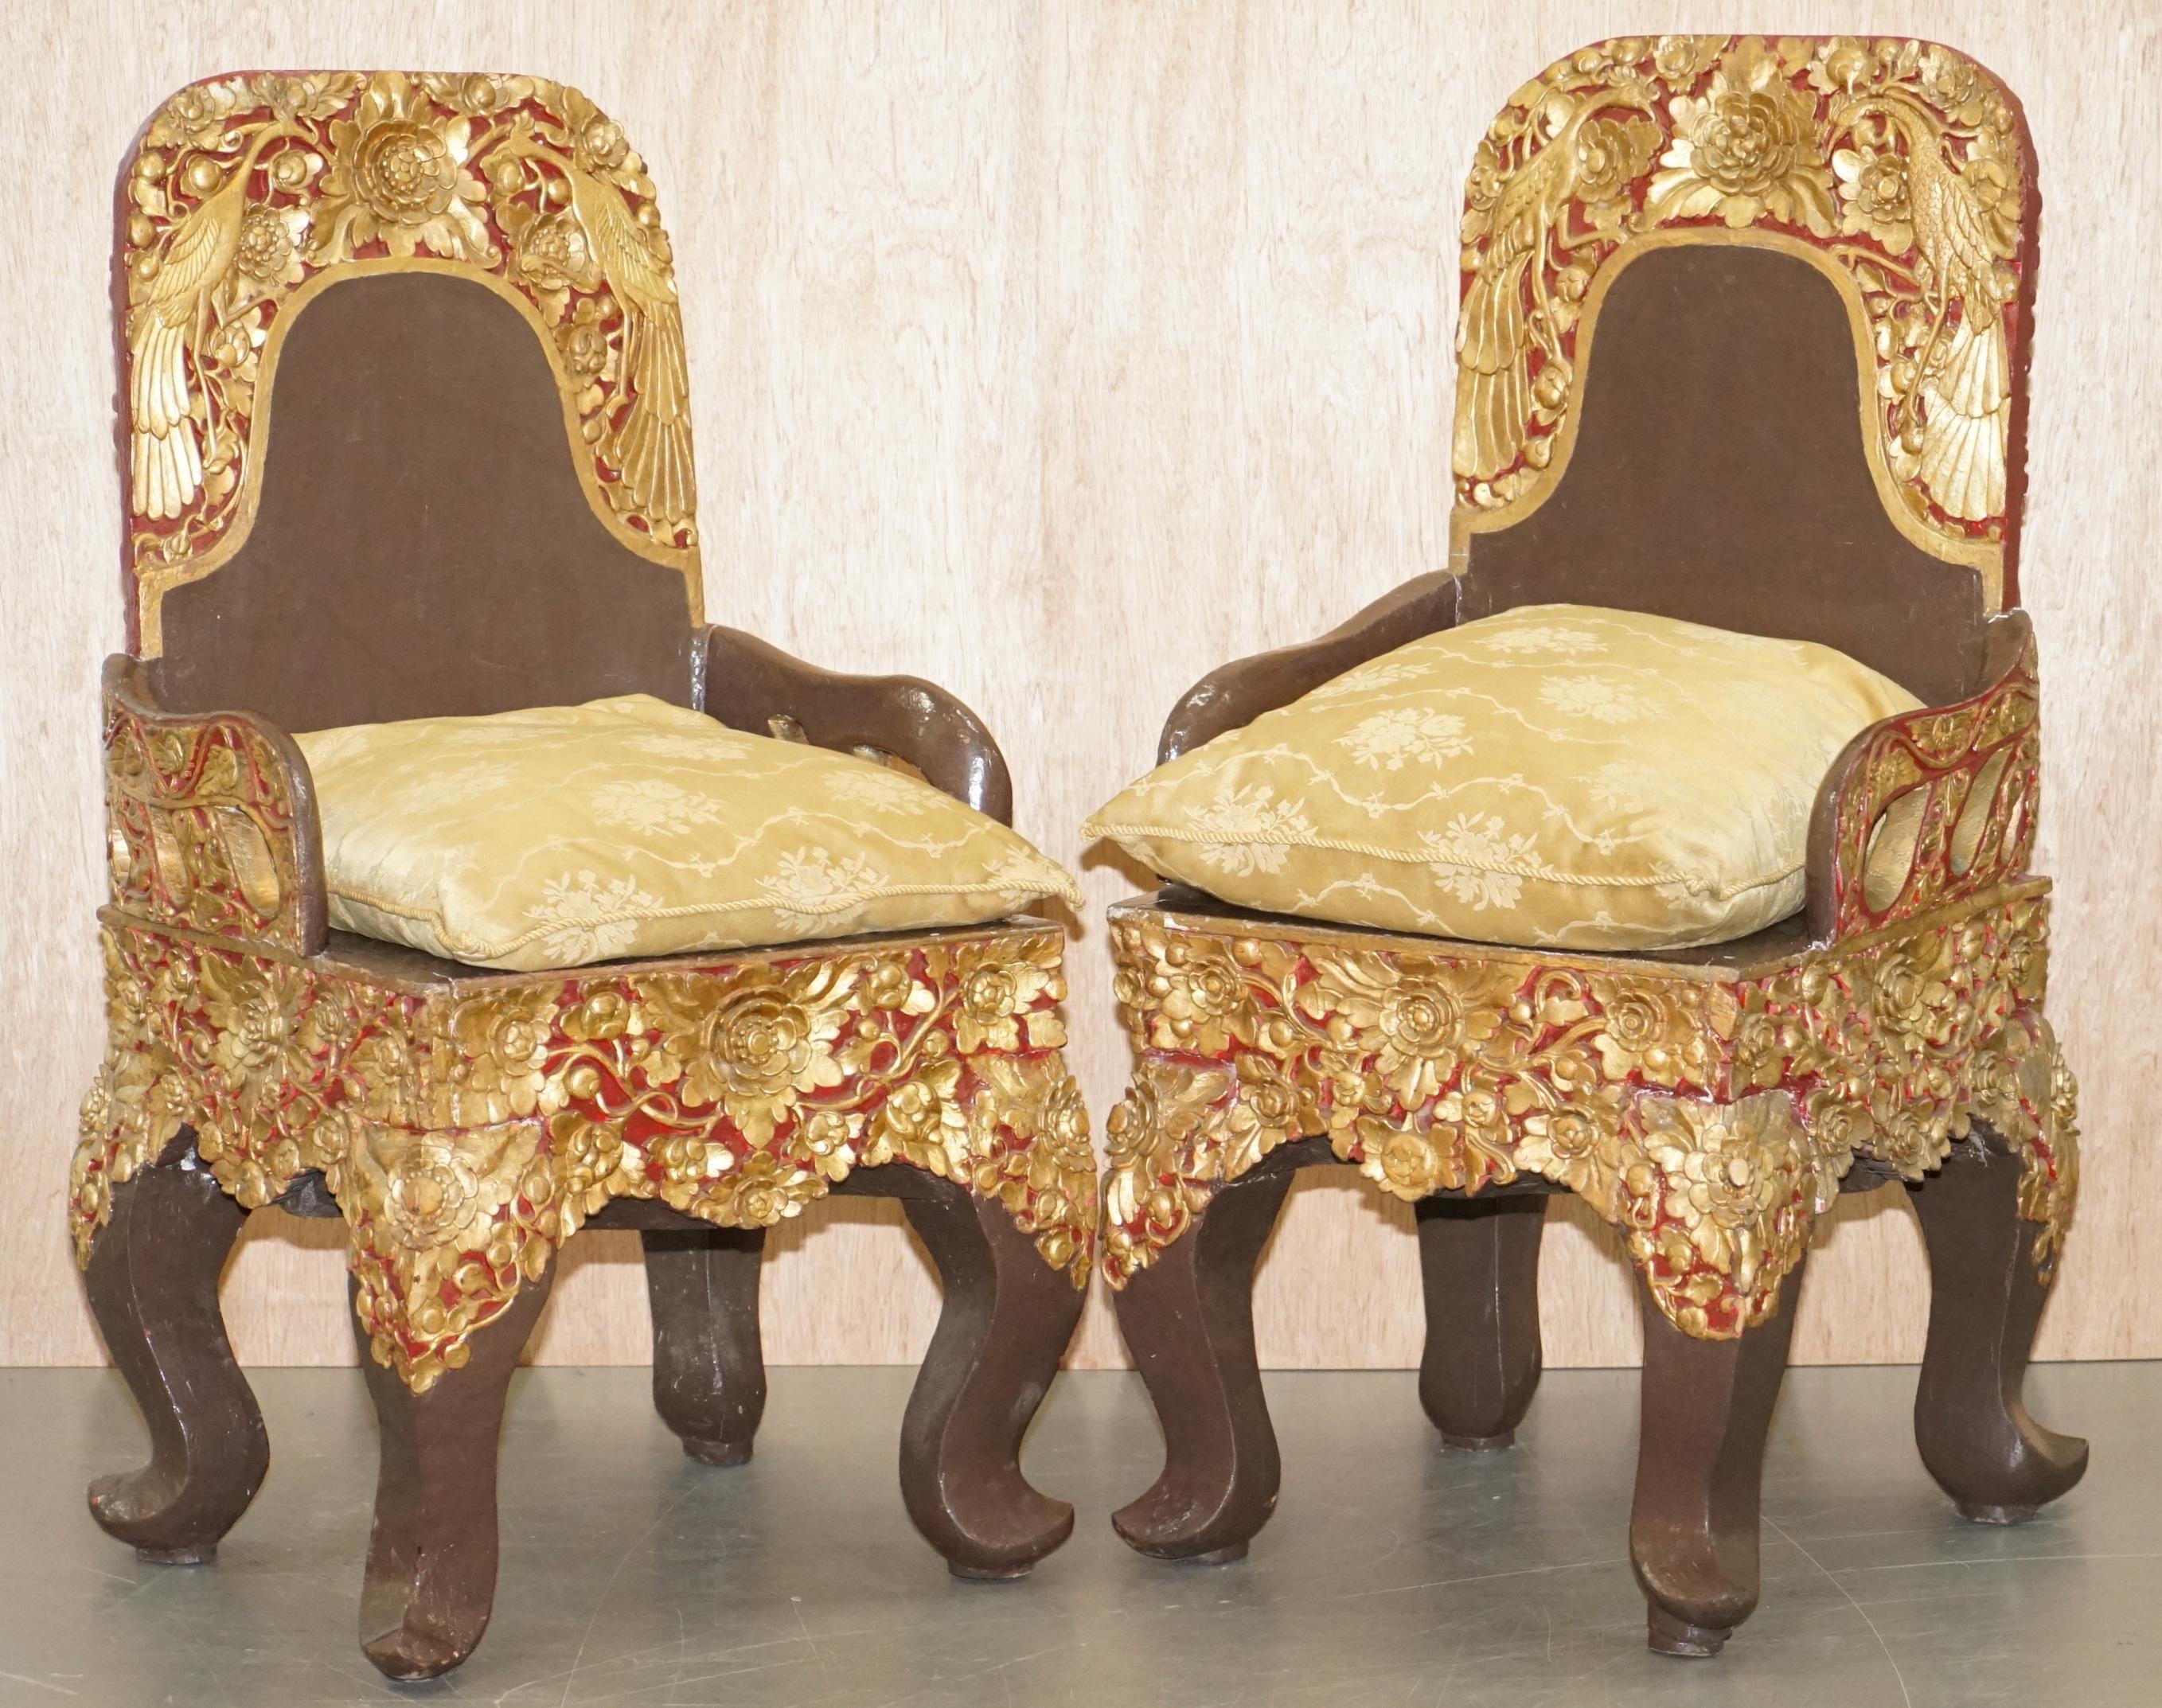 We are delighted to offer for sale this extremely rare pair of original circa 1900 Tibetan Ceremonial chairs with gold gilt decoration and large cast figures of the Buddhist god Nyingma

Where to begin! Wow, what a pair of large and important